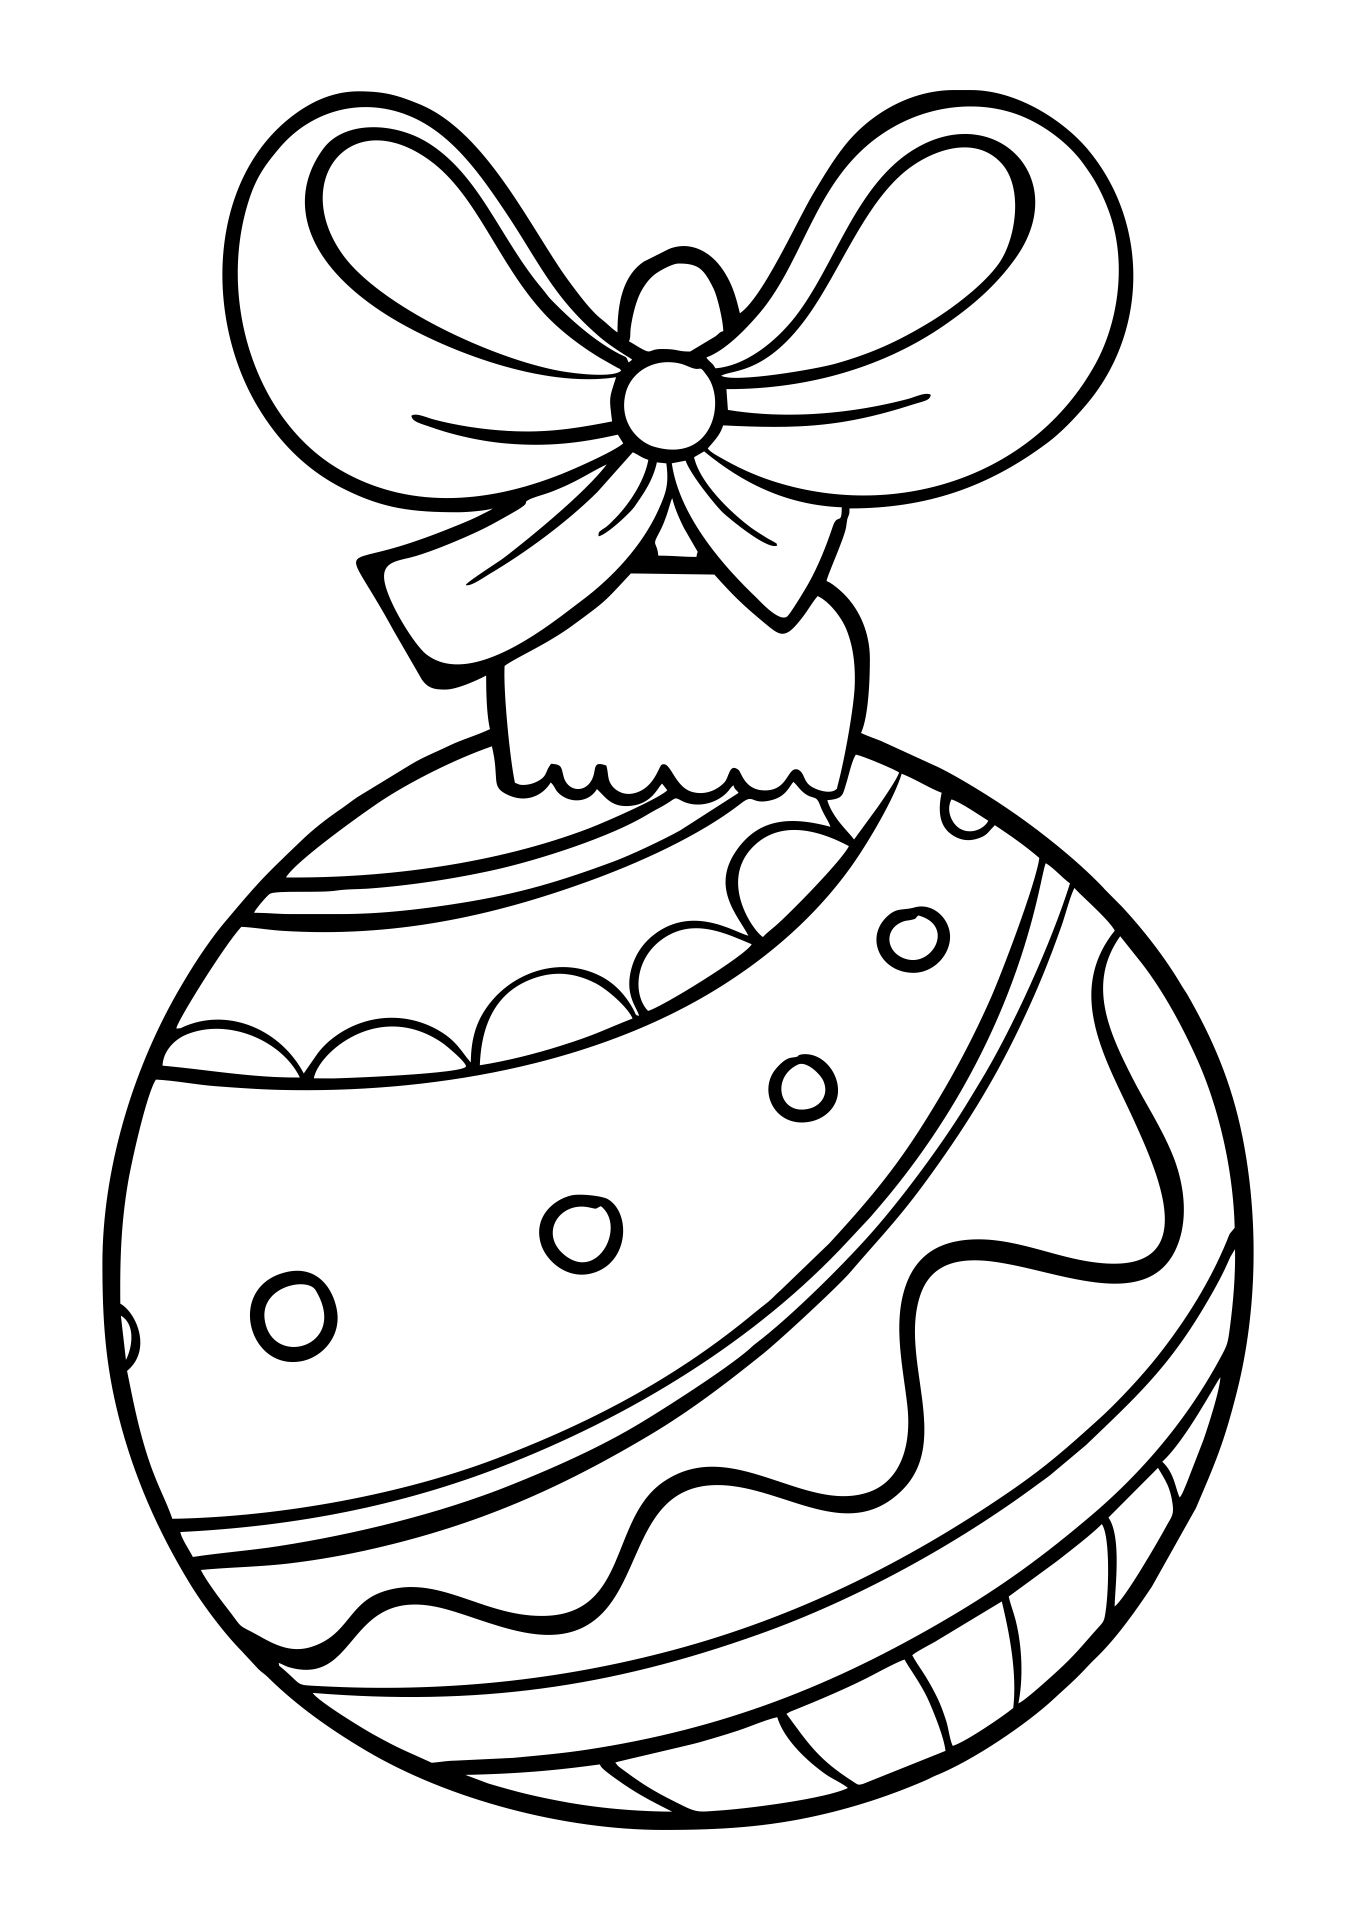 15 Best Free Christmas Printable Ornament Coloring Pages PDF For Free At Printablee